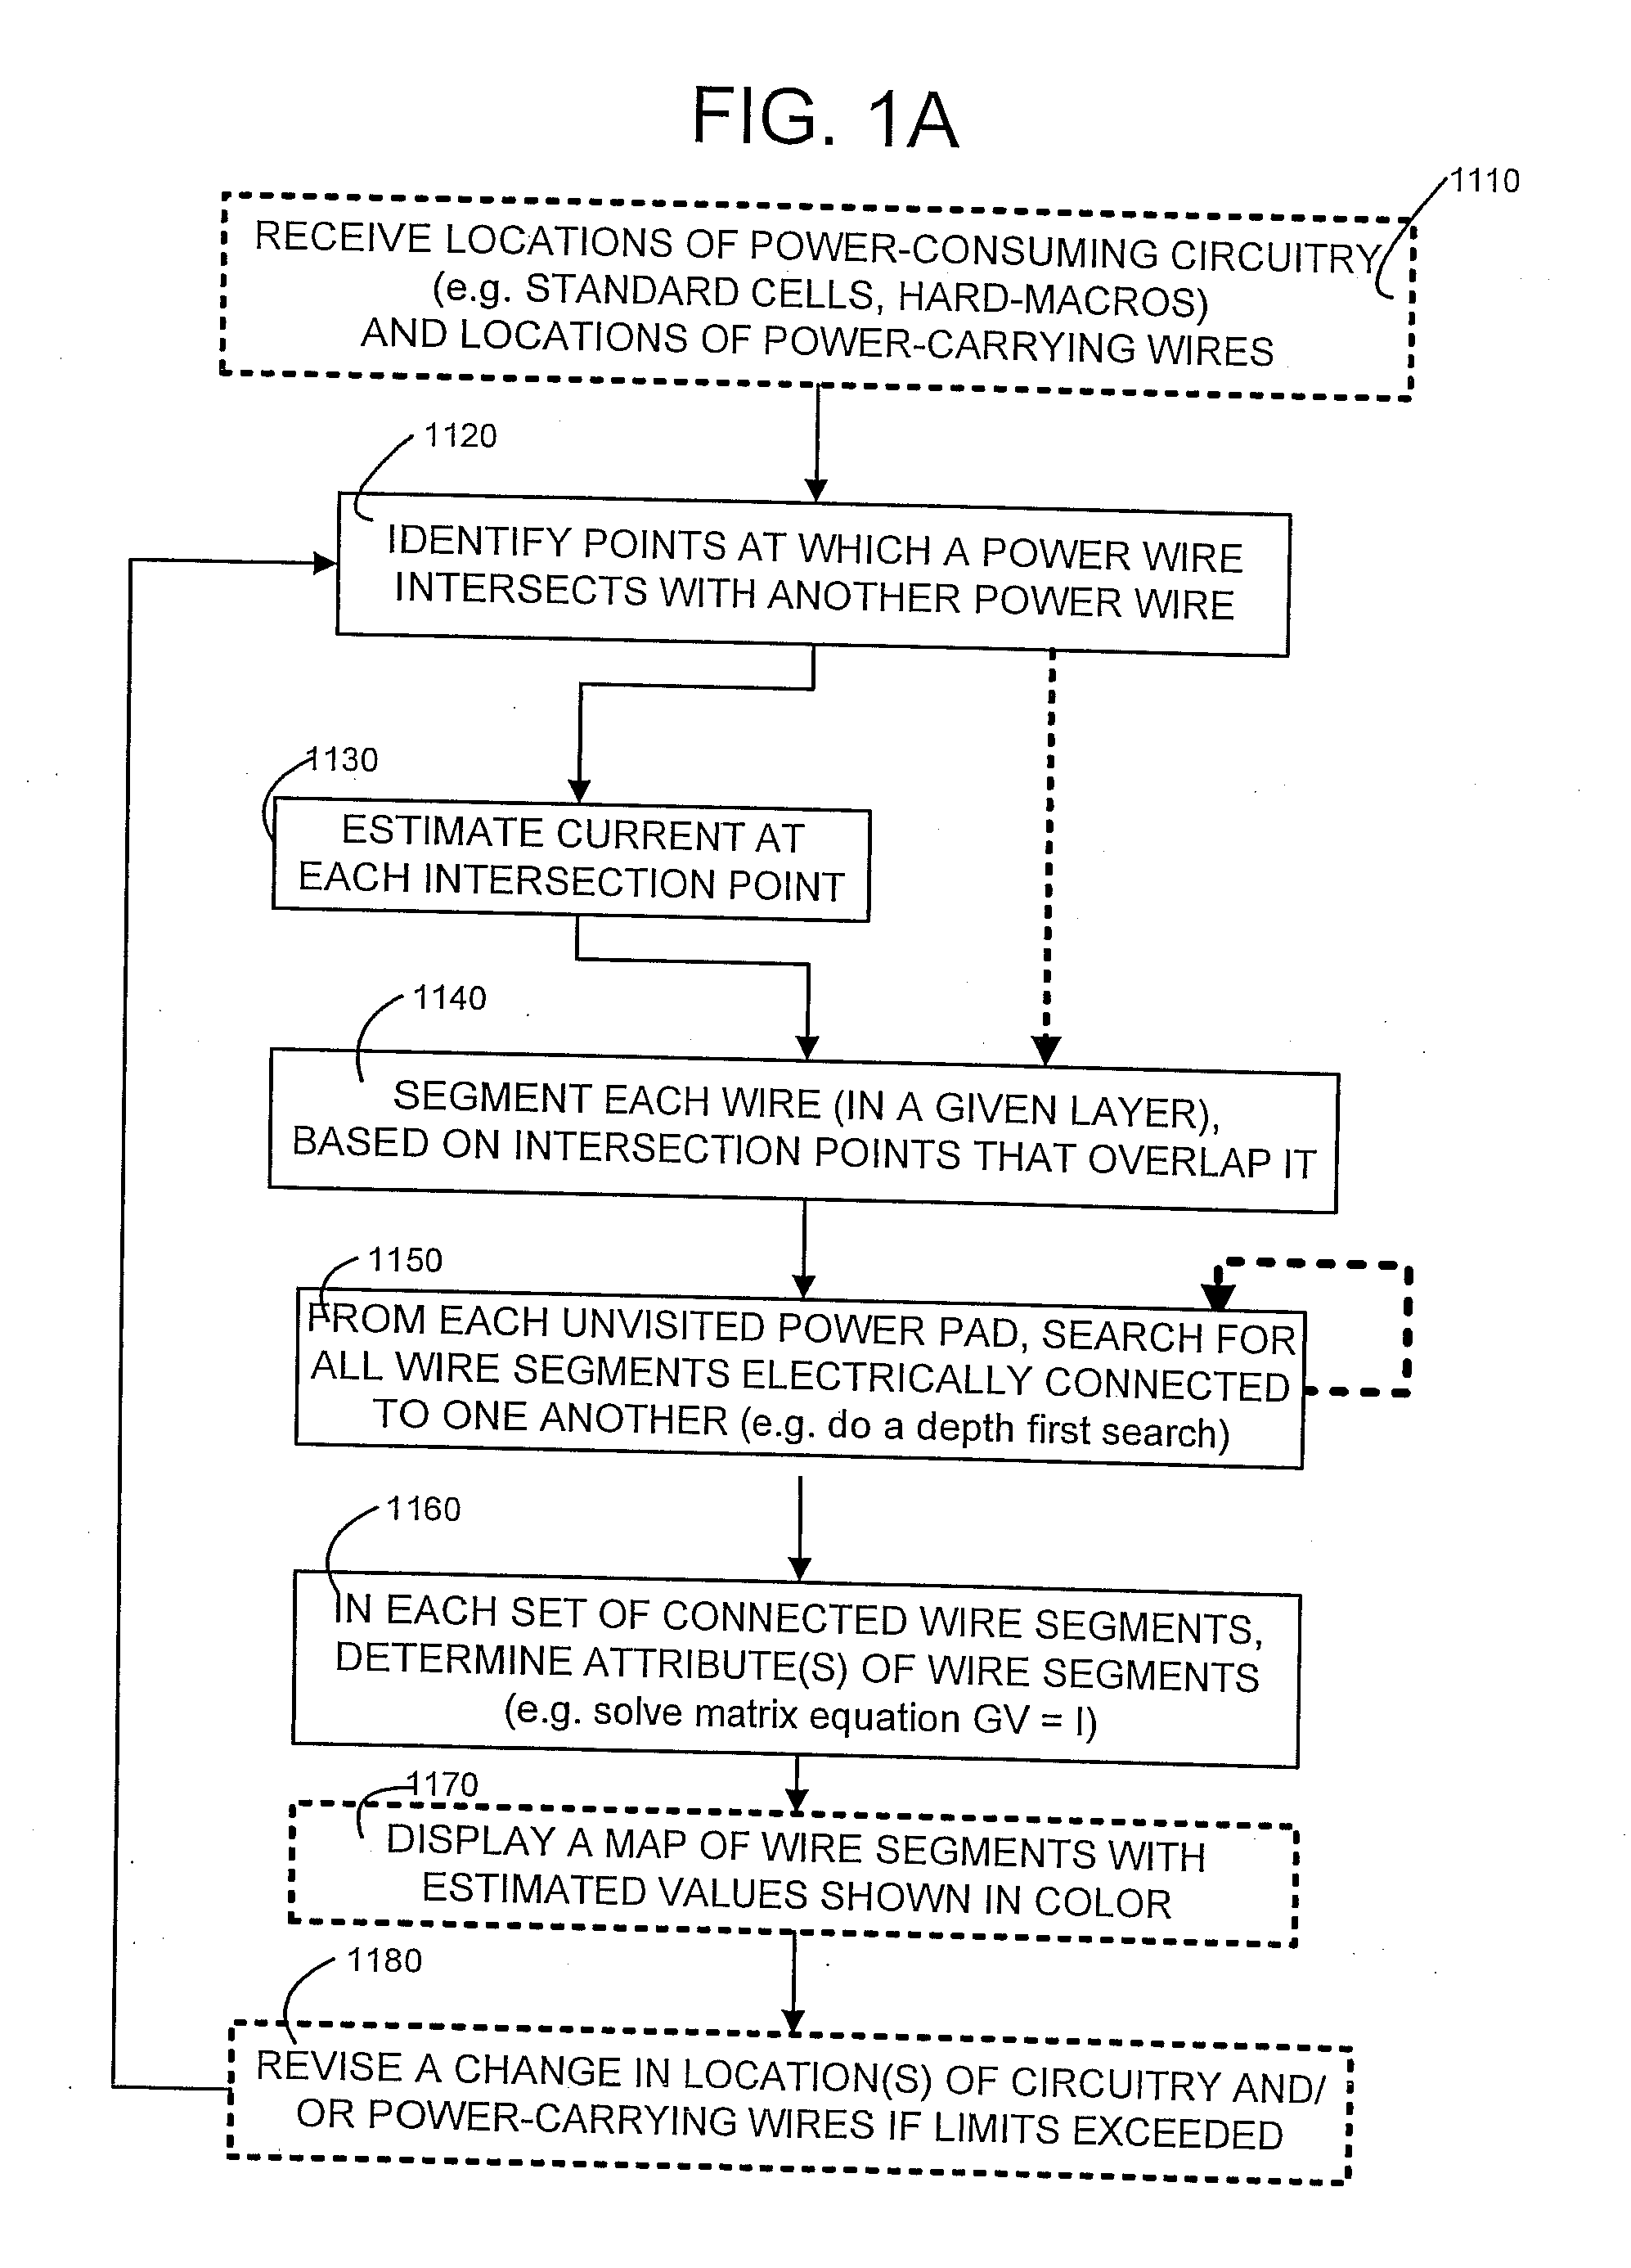 Power Network Analyzer For An Integrated Circuit Design